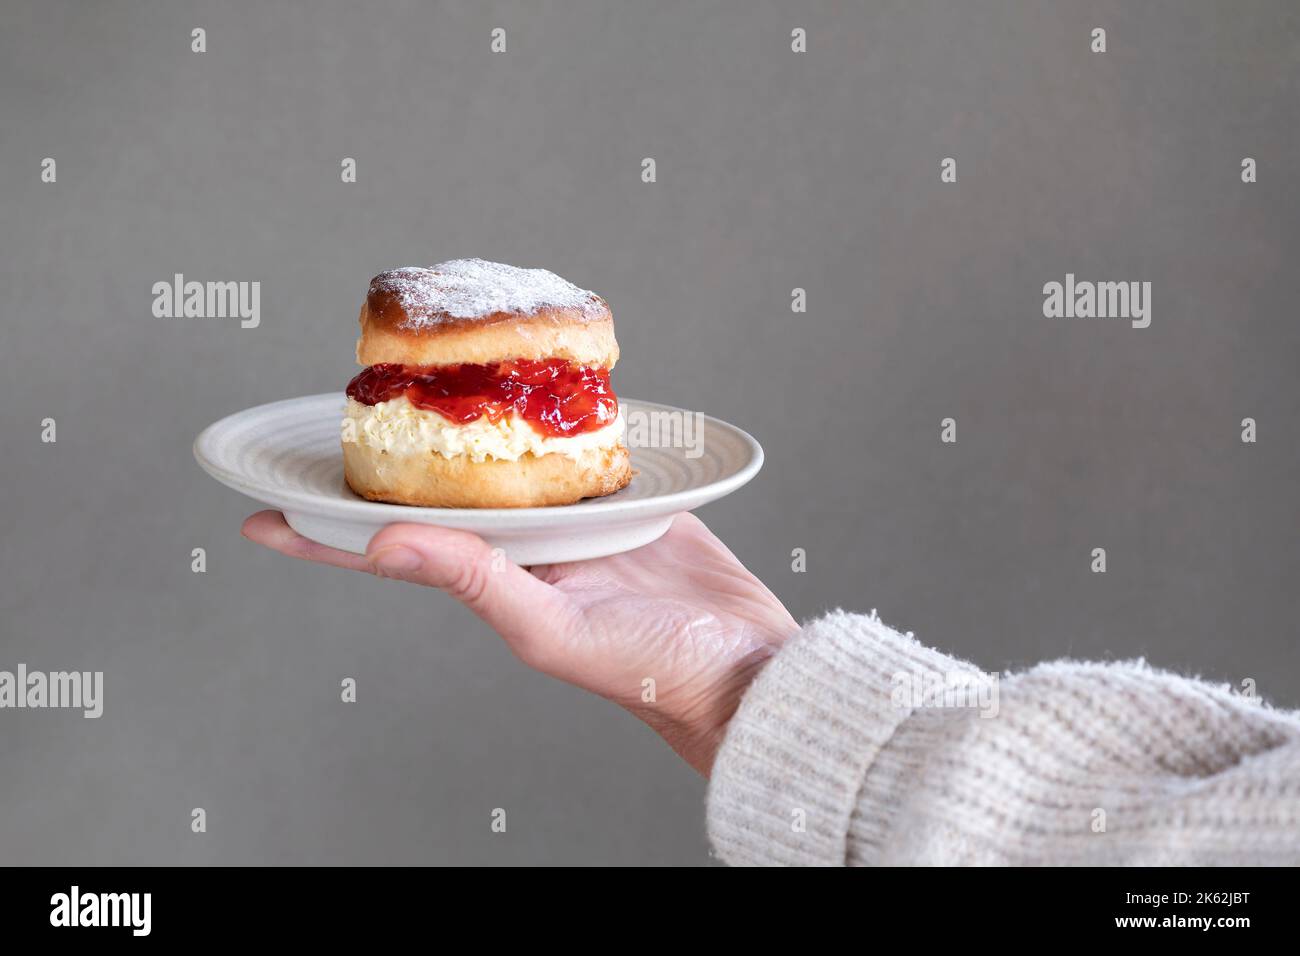 A fresh traditional English home made scone. The cake is split and filled with jam and topped with thick clotted cream. A delicious Devon cream tea. Stock Photo